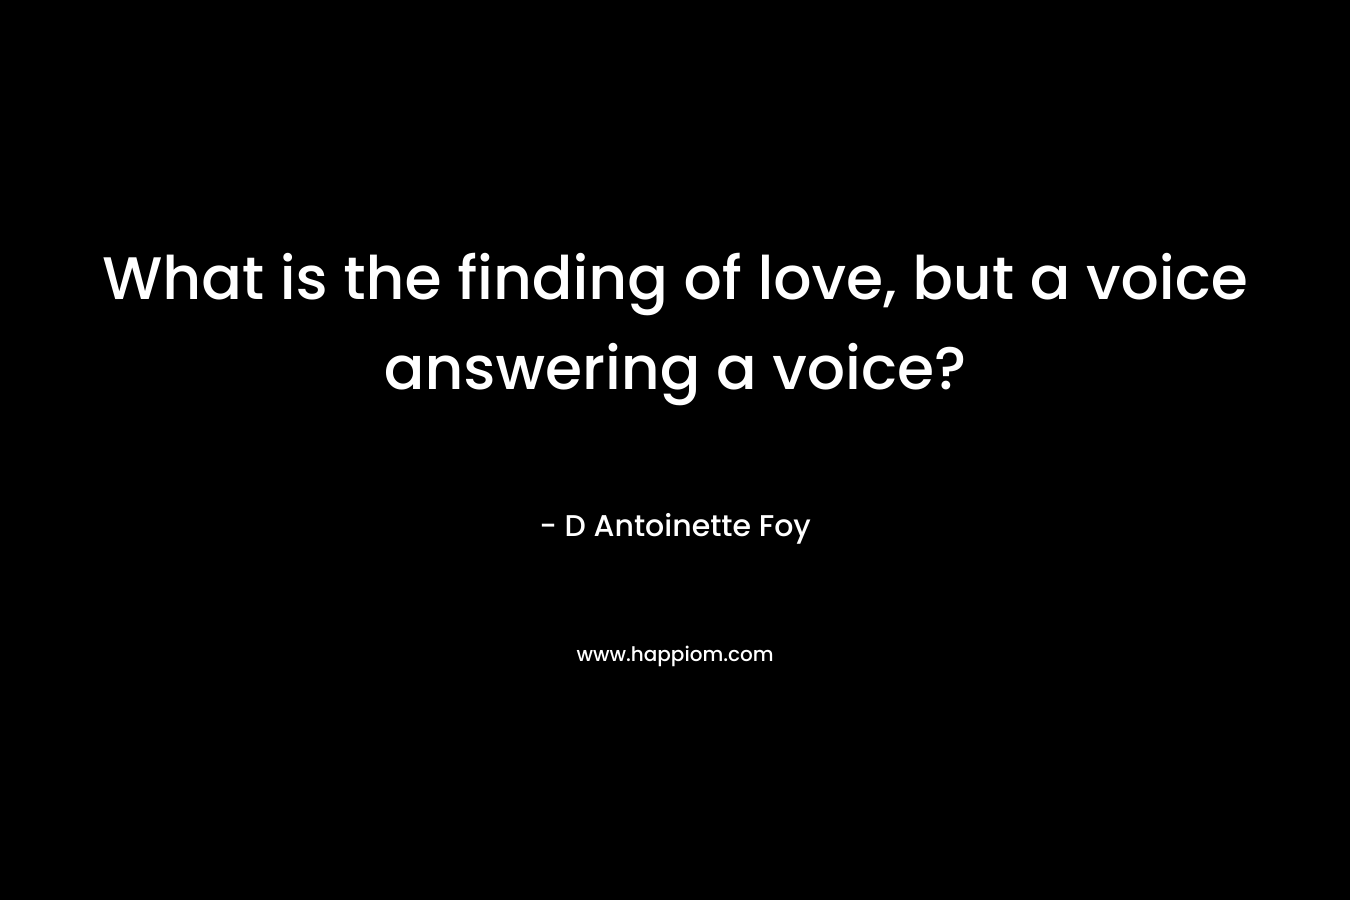 What is the finding of love, but a voice answering a voice? – D Antoinette Foy